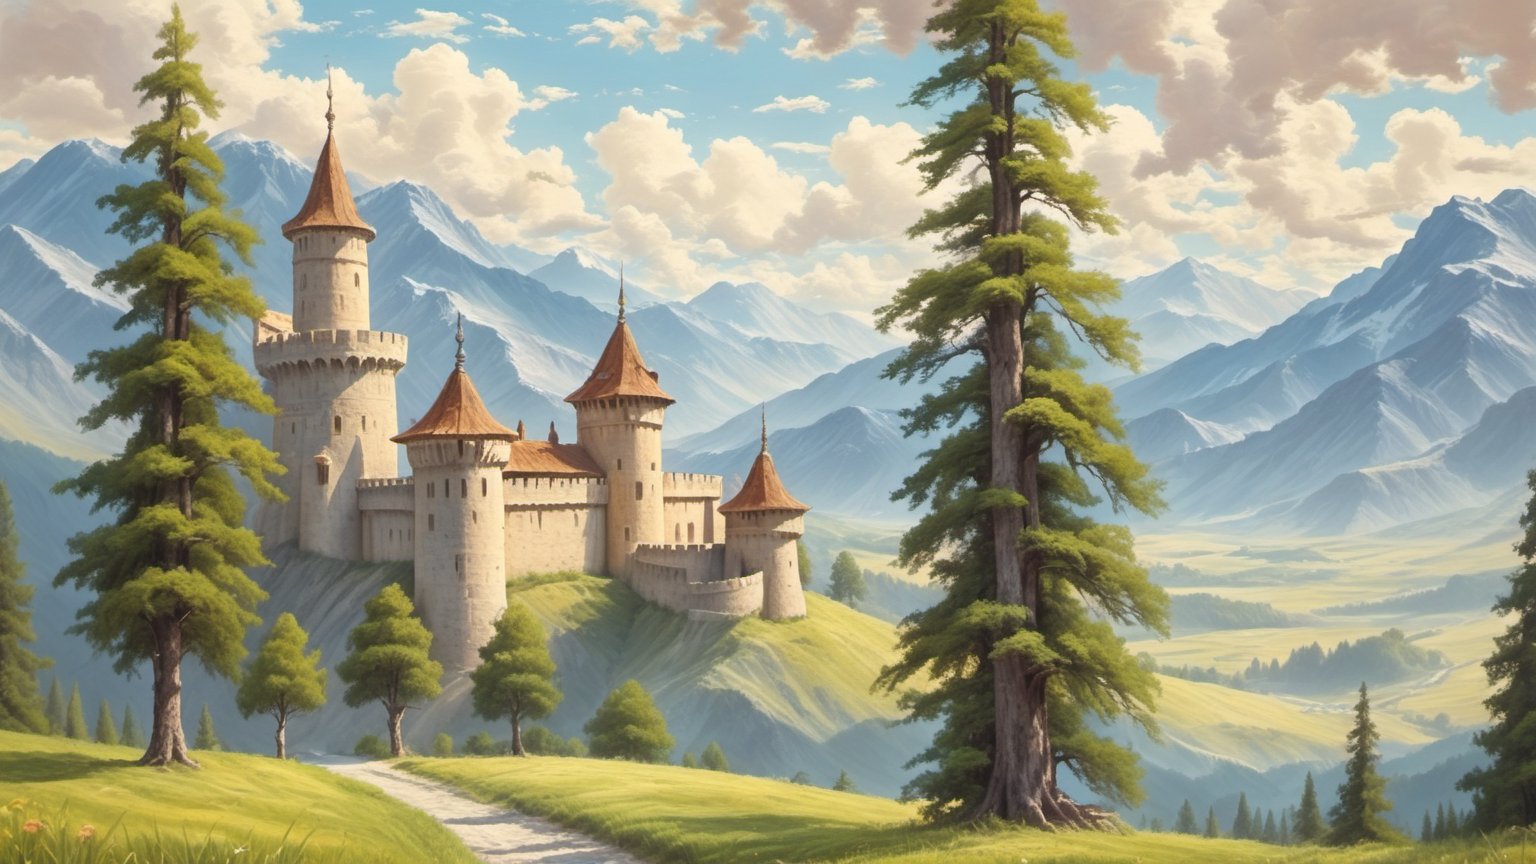 trees (in_front), castle, (mountains in background), noon (cloudy_sky),artistic oil painting stick,rough,ADD MORE DETAIL